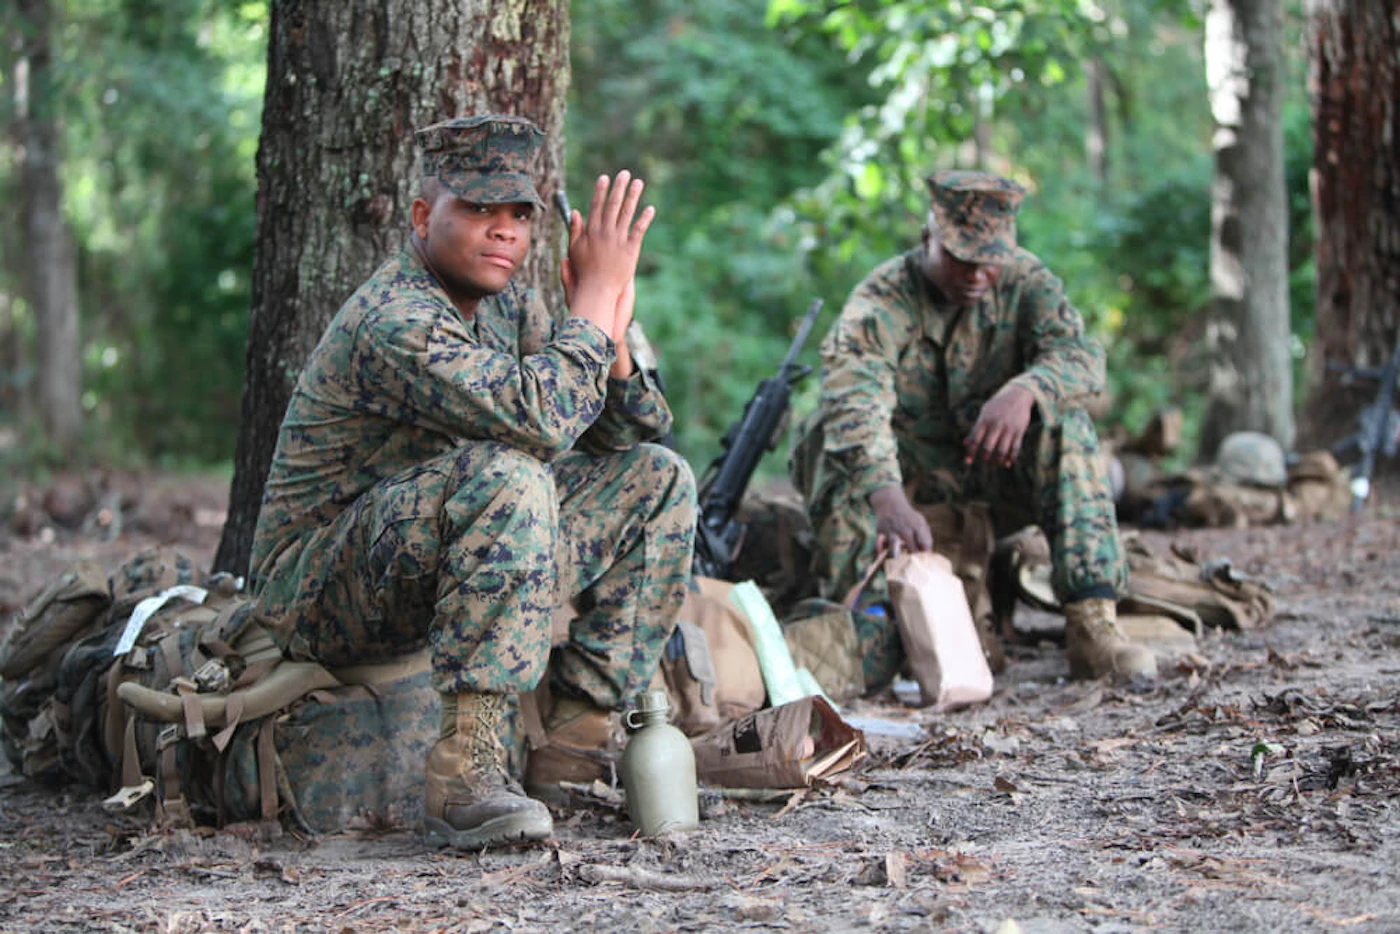 US Marines stationed at Camp Lejeune in North Carolina in 2011. New federal legislation aims to improve health care for service members exposed to contaminated drinking water at the military base, as well as soldiers exposed to toxic burn pits in Iraq and Afghanistan. (Shutterstock)